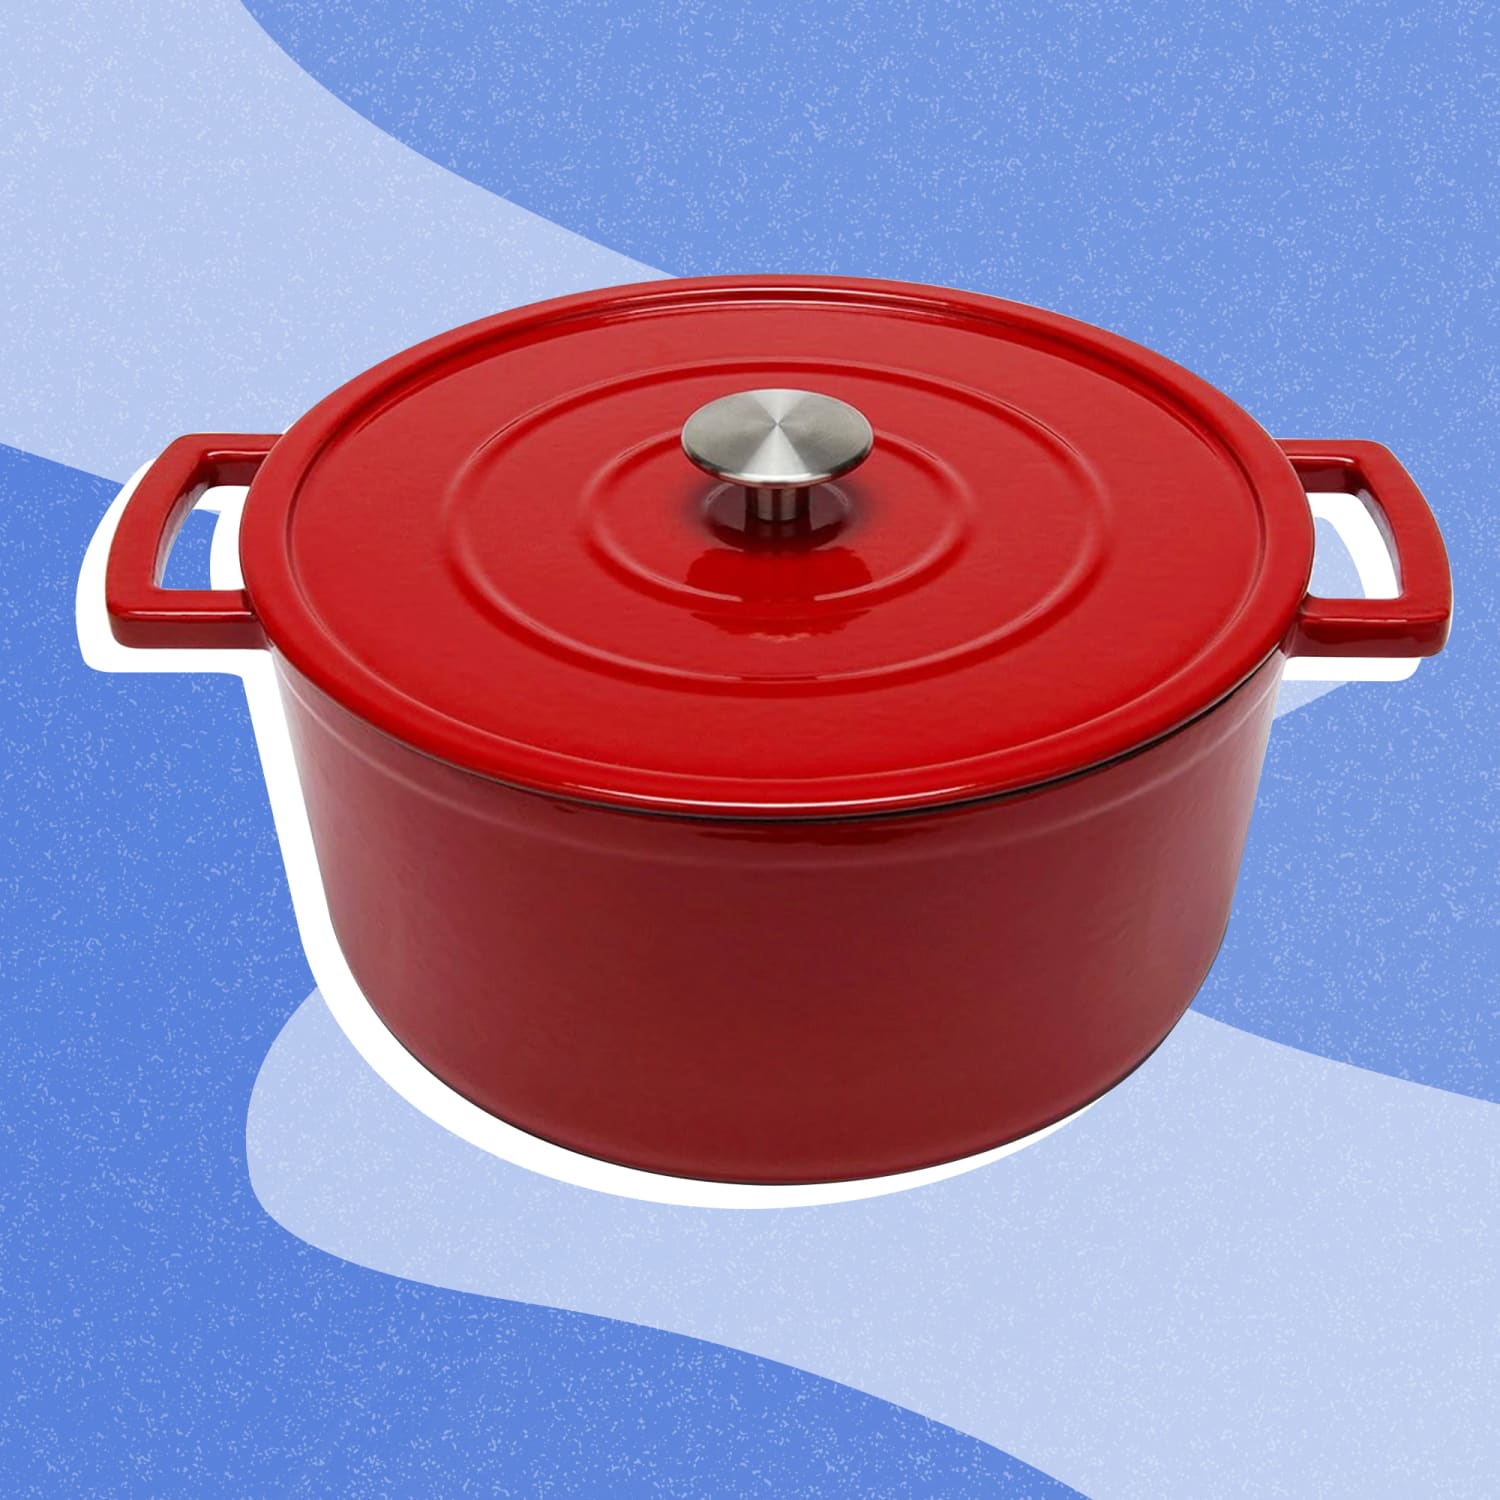 Lodge 6-Qt. Cherry on Top Red USA Enameled Cast Iron Dutch Oven